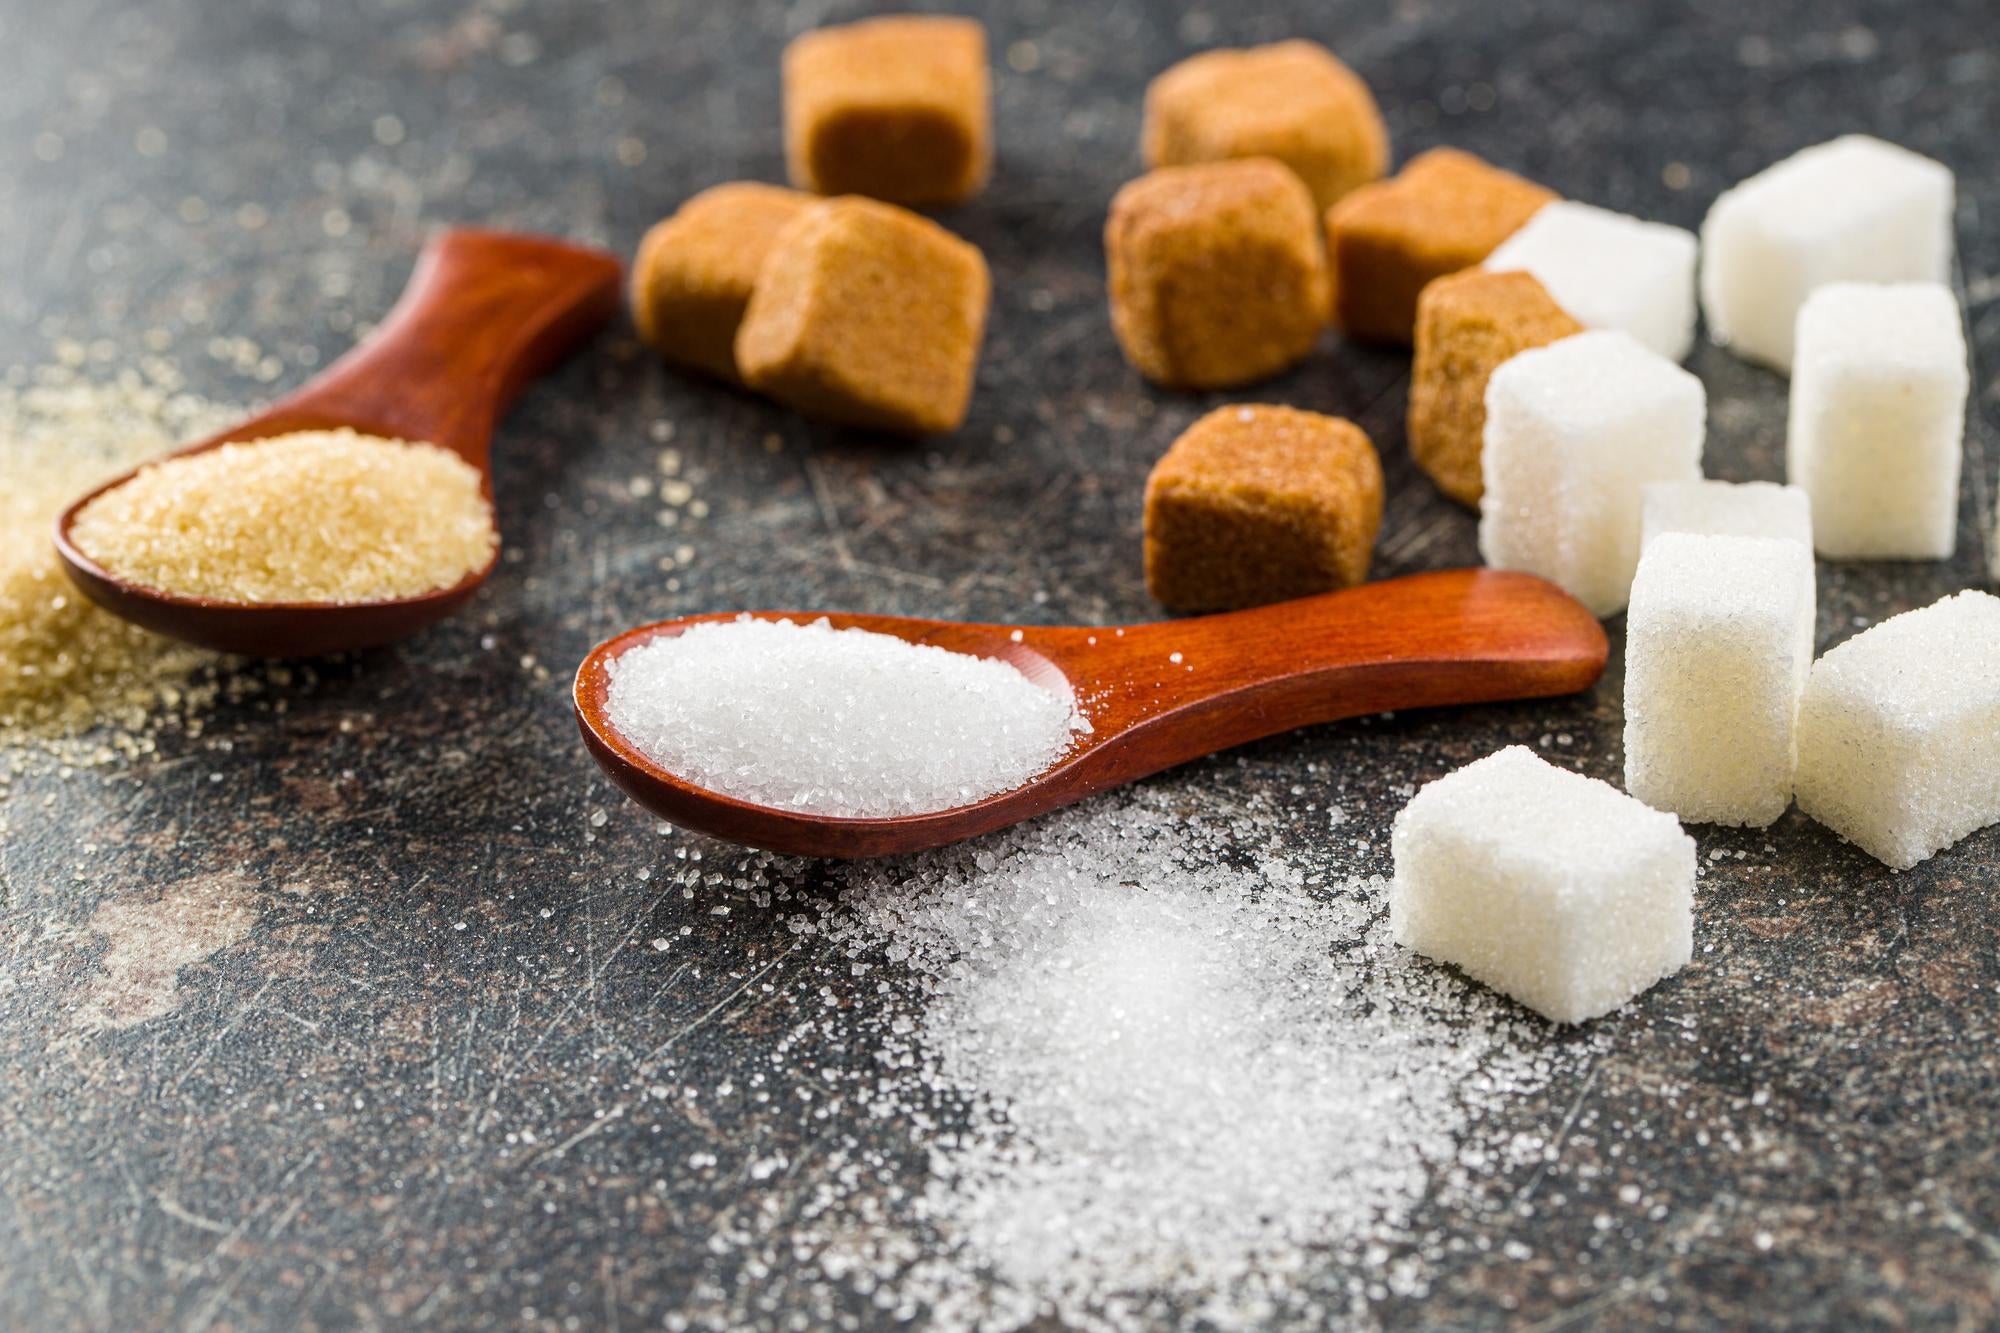 Cane Sugar vs. Beet Sugar: What's the Difference and Why It Matters